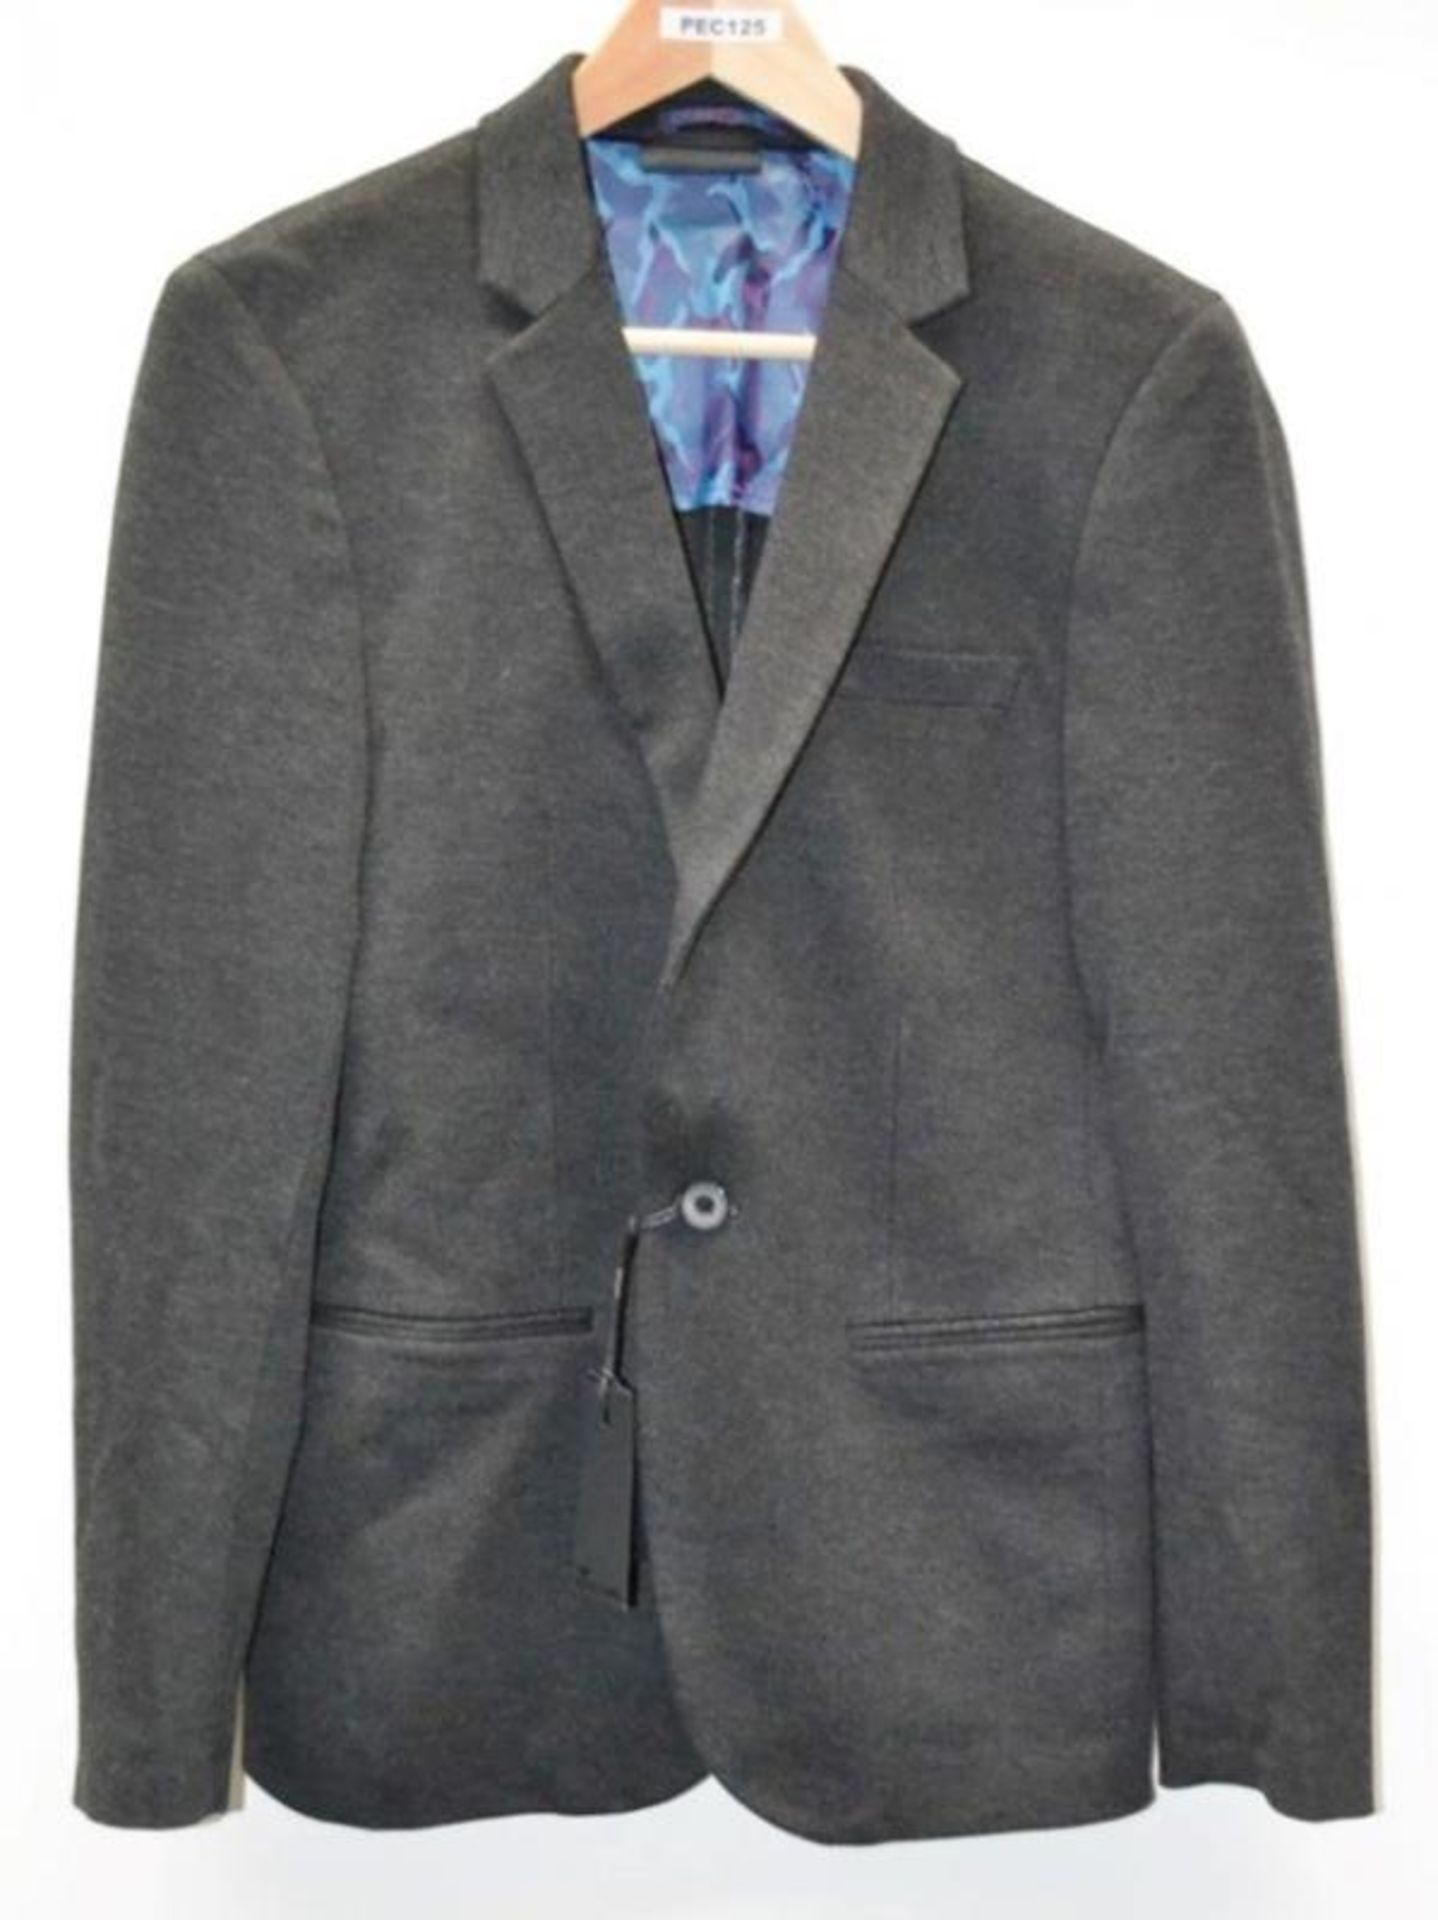 1 x PRE END Branded "Dom" Mens Blazer Jacket - New Stock With Tags - Recent Store Closure - Colour: